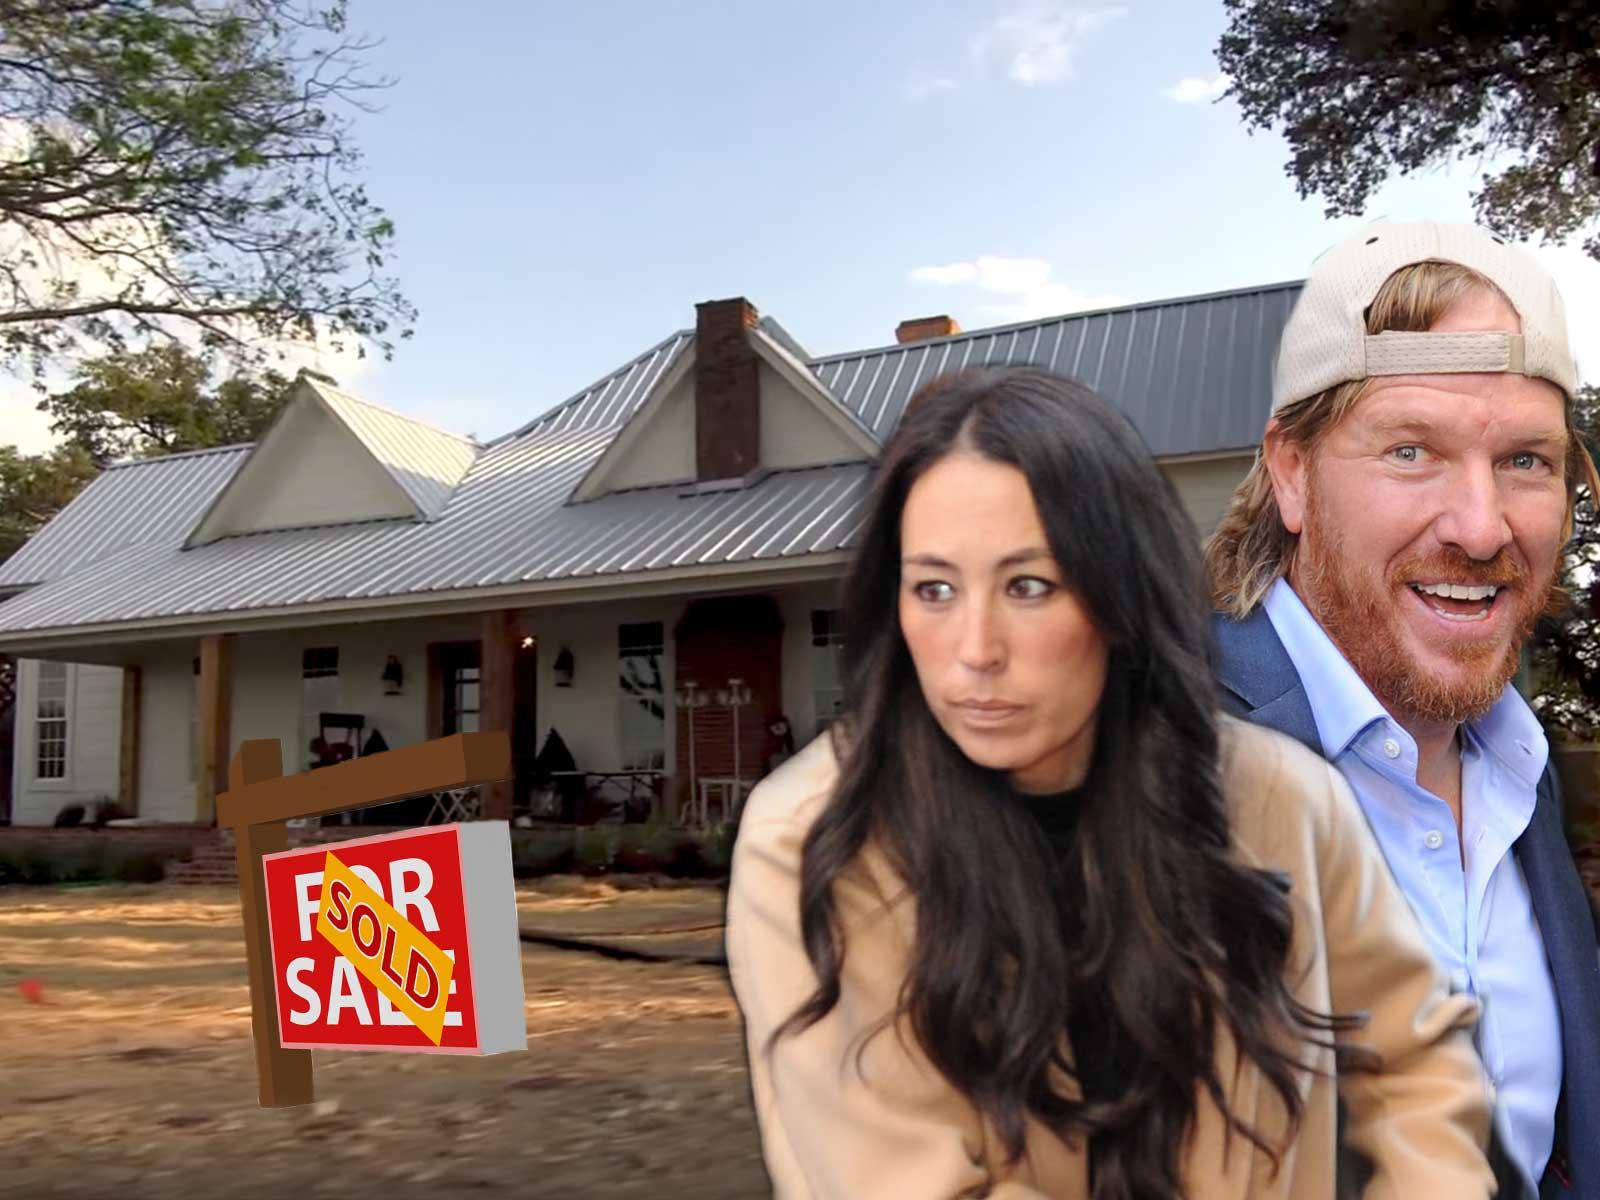 Chip and Joanna Gaines DID NOT Sell Beloved ‘Fixer Upper’ Farmhouse … Just Some Land [UPDATE]